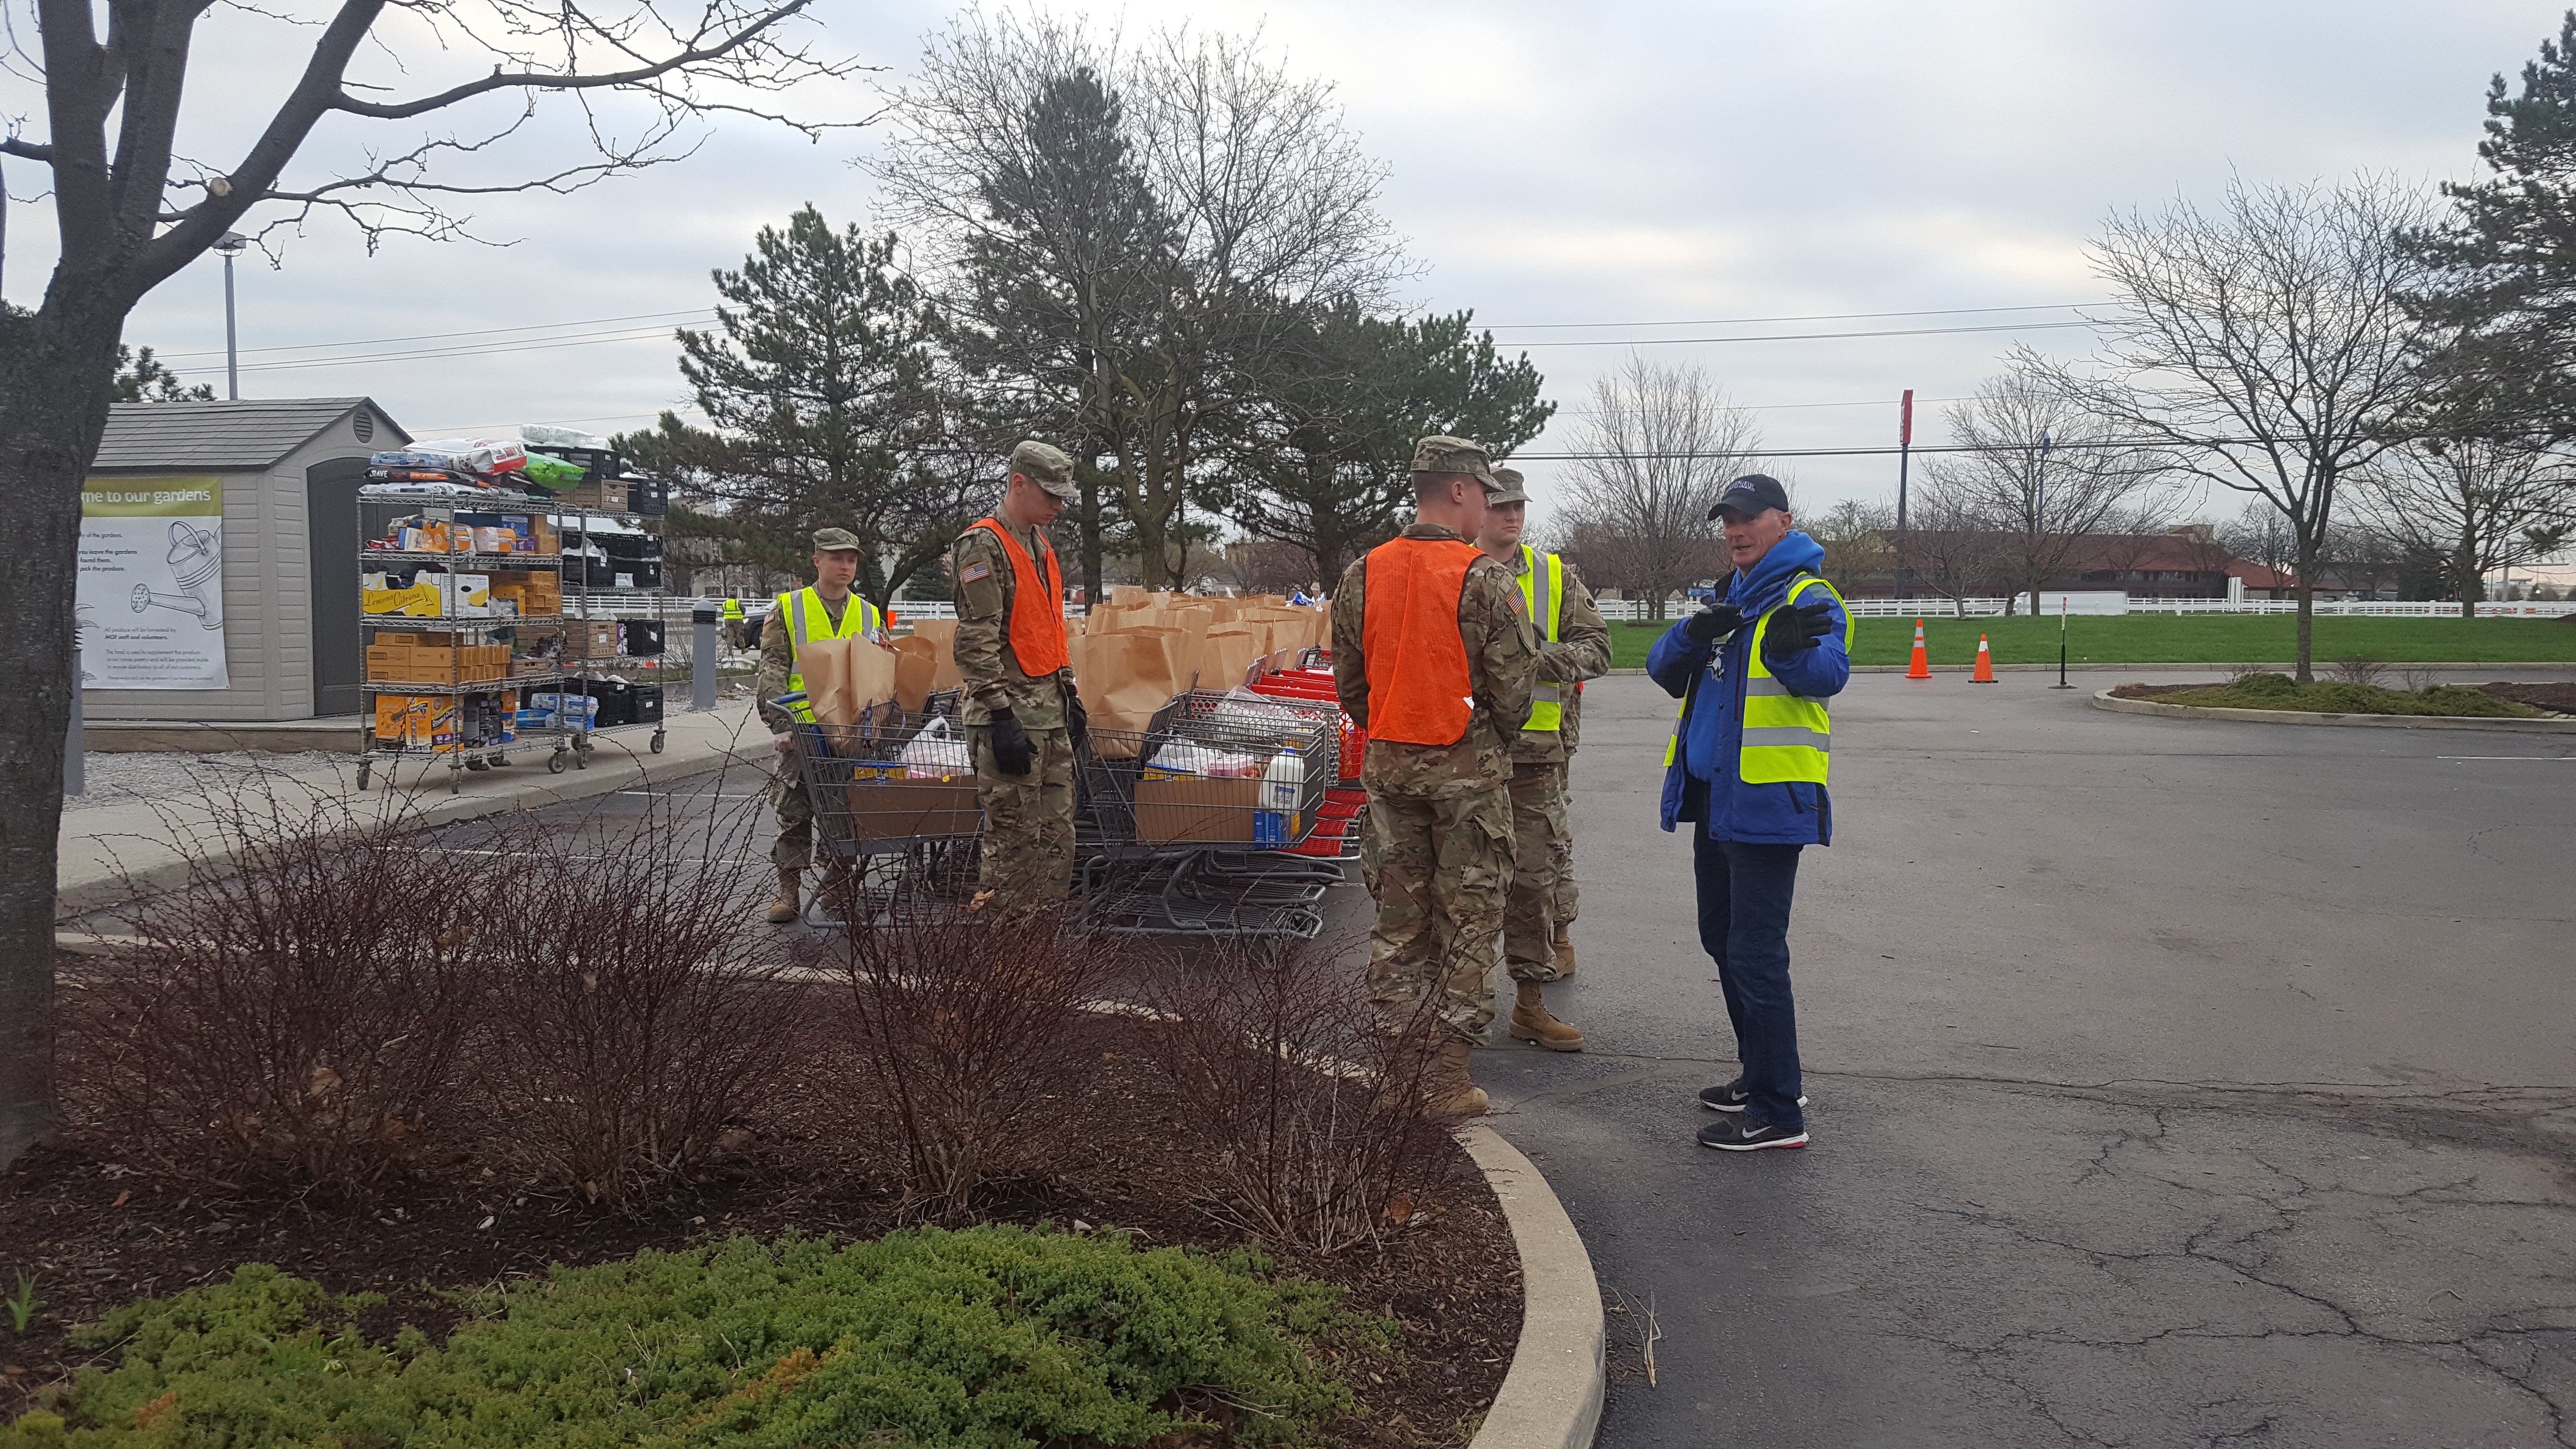 Soldiers prepare to hand out groceries in parking lot with lined up grocery carts.